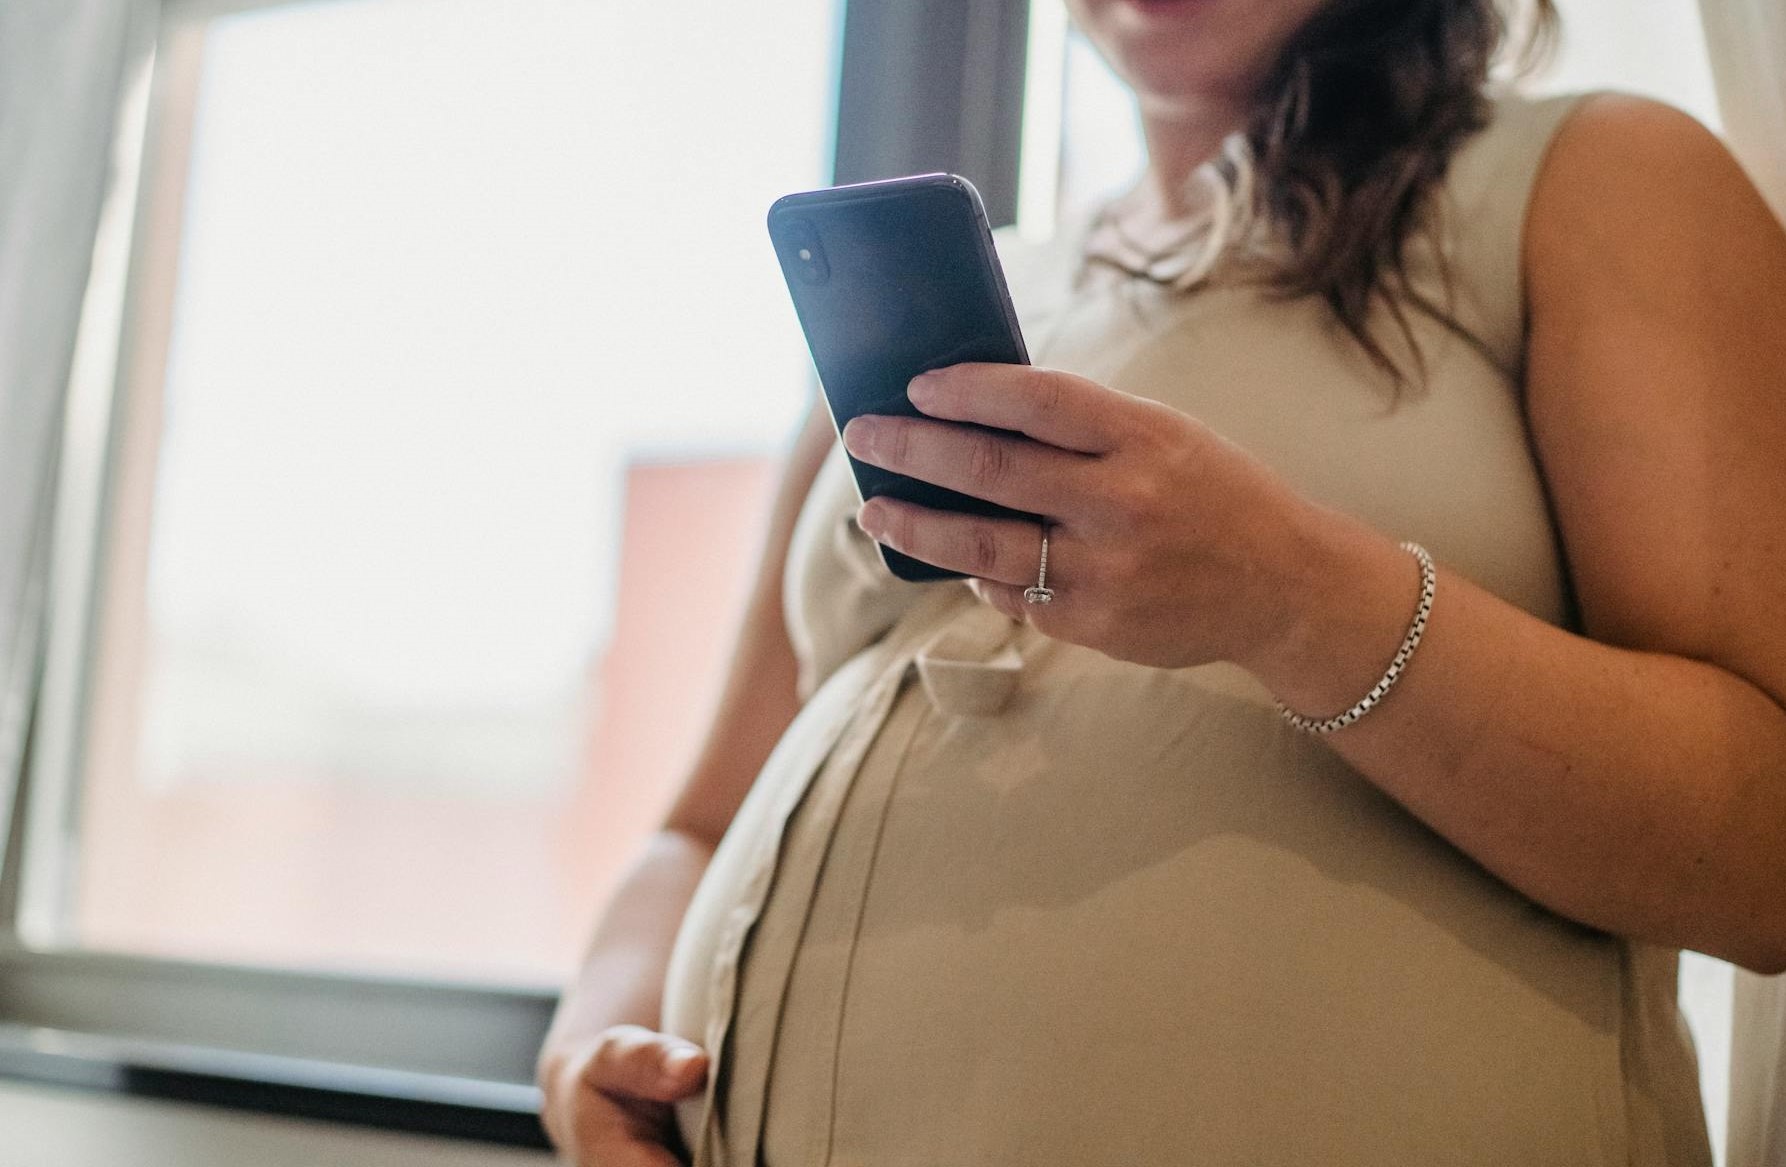 A pregnant woman holding a smartphone | Source: Pexels